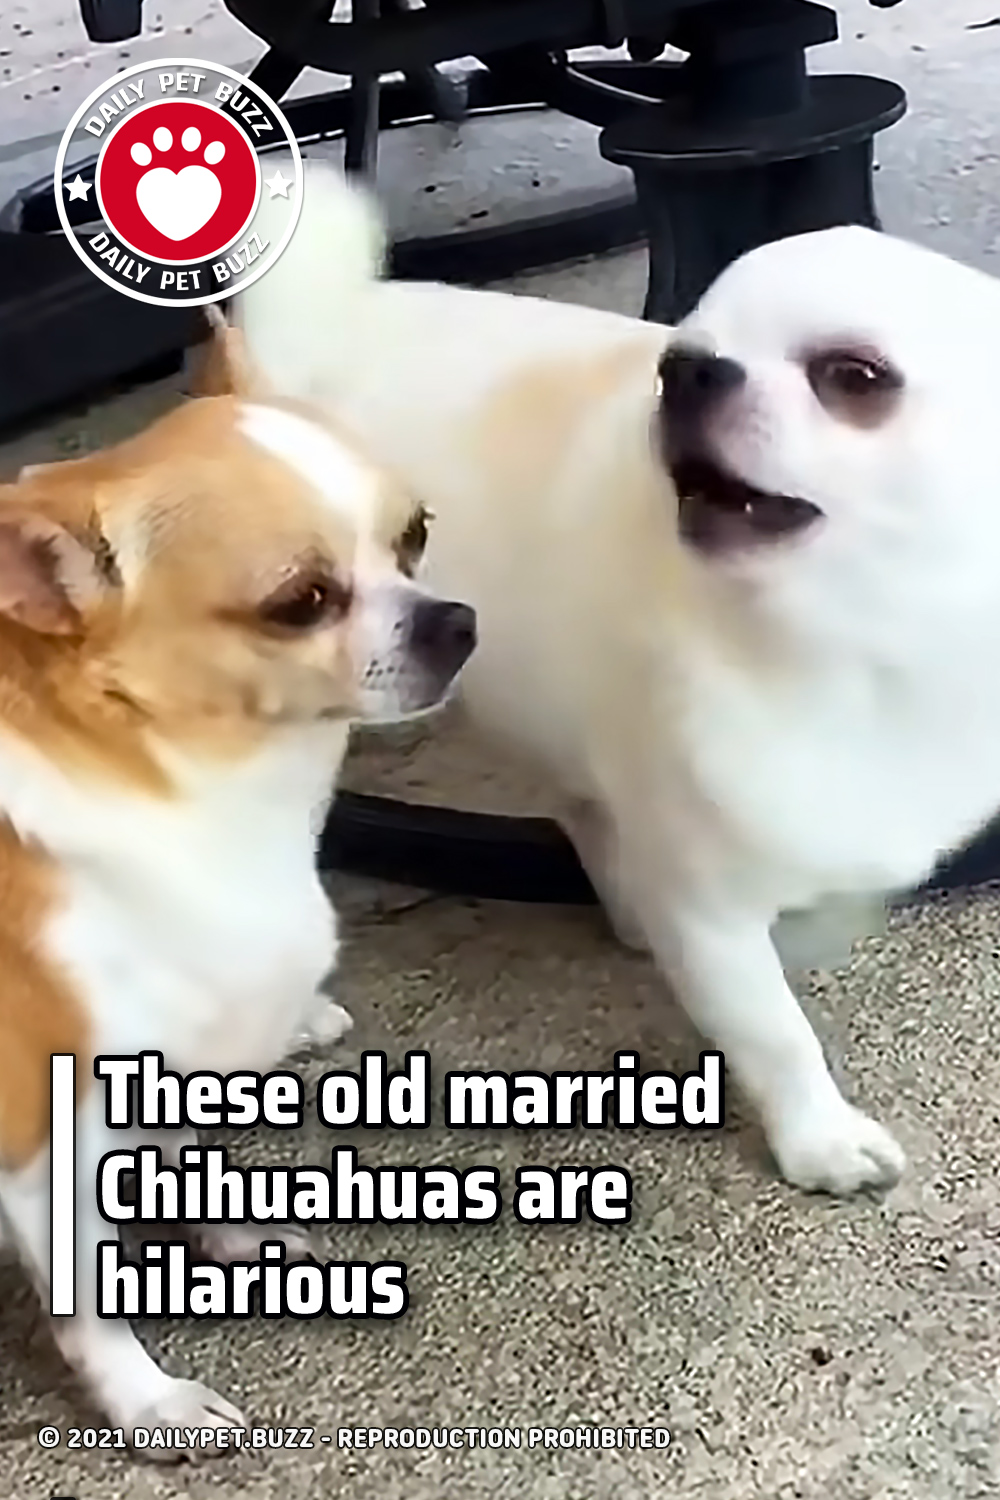 These old married Chihuahuas are hilarious